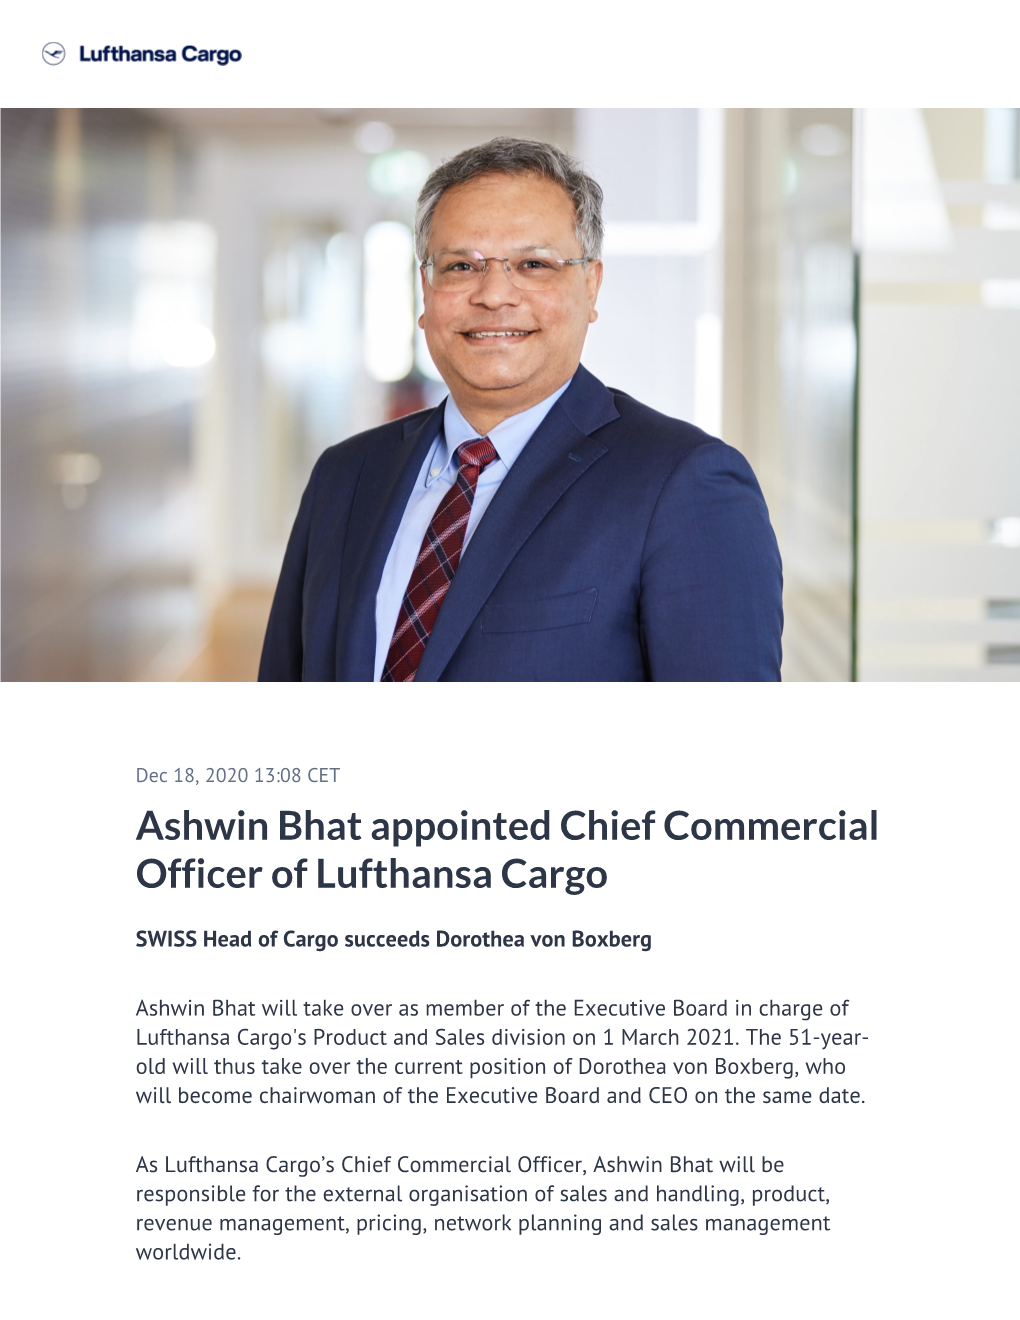 Ashwin Bhat Appointed Chief Commercial Officer of Lufthansa Cargo